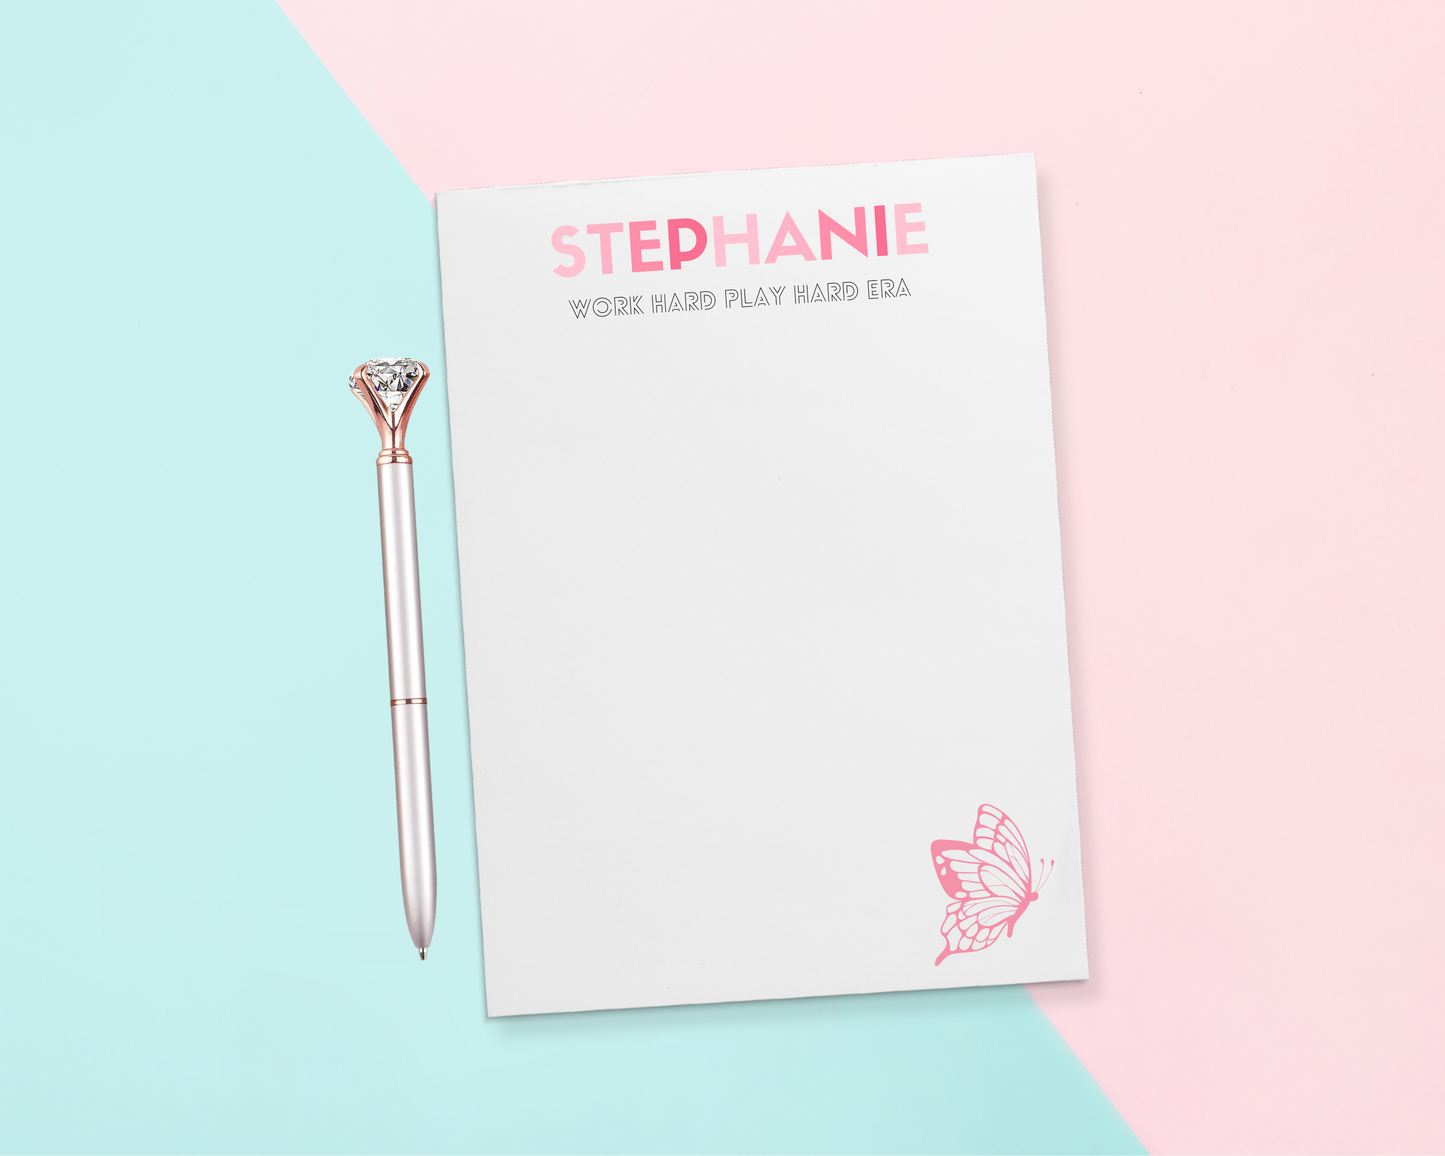 We all know that person who loves Pop culture! Give a thoughtful and useful gift for someone to stay organized. Personalized notepads are exactly the gift they’d love. Choose the color combination for the recipient's name and custom slogan below - such as "Work Hard Play Hard Era".